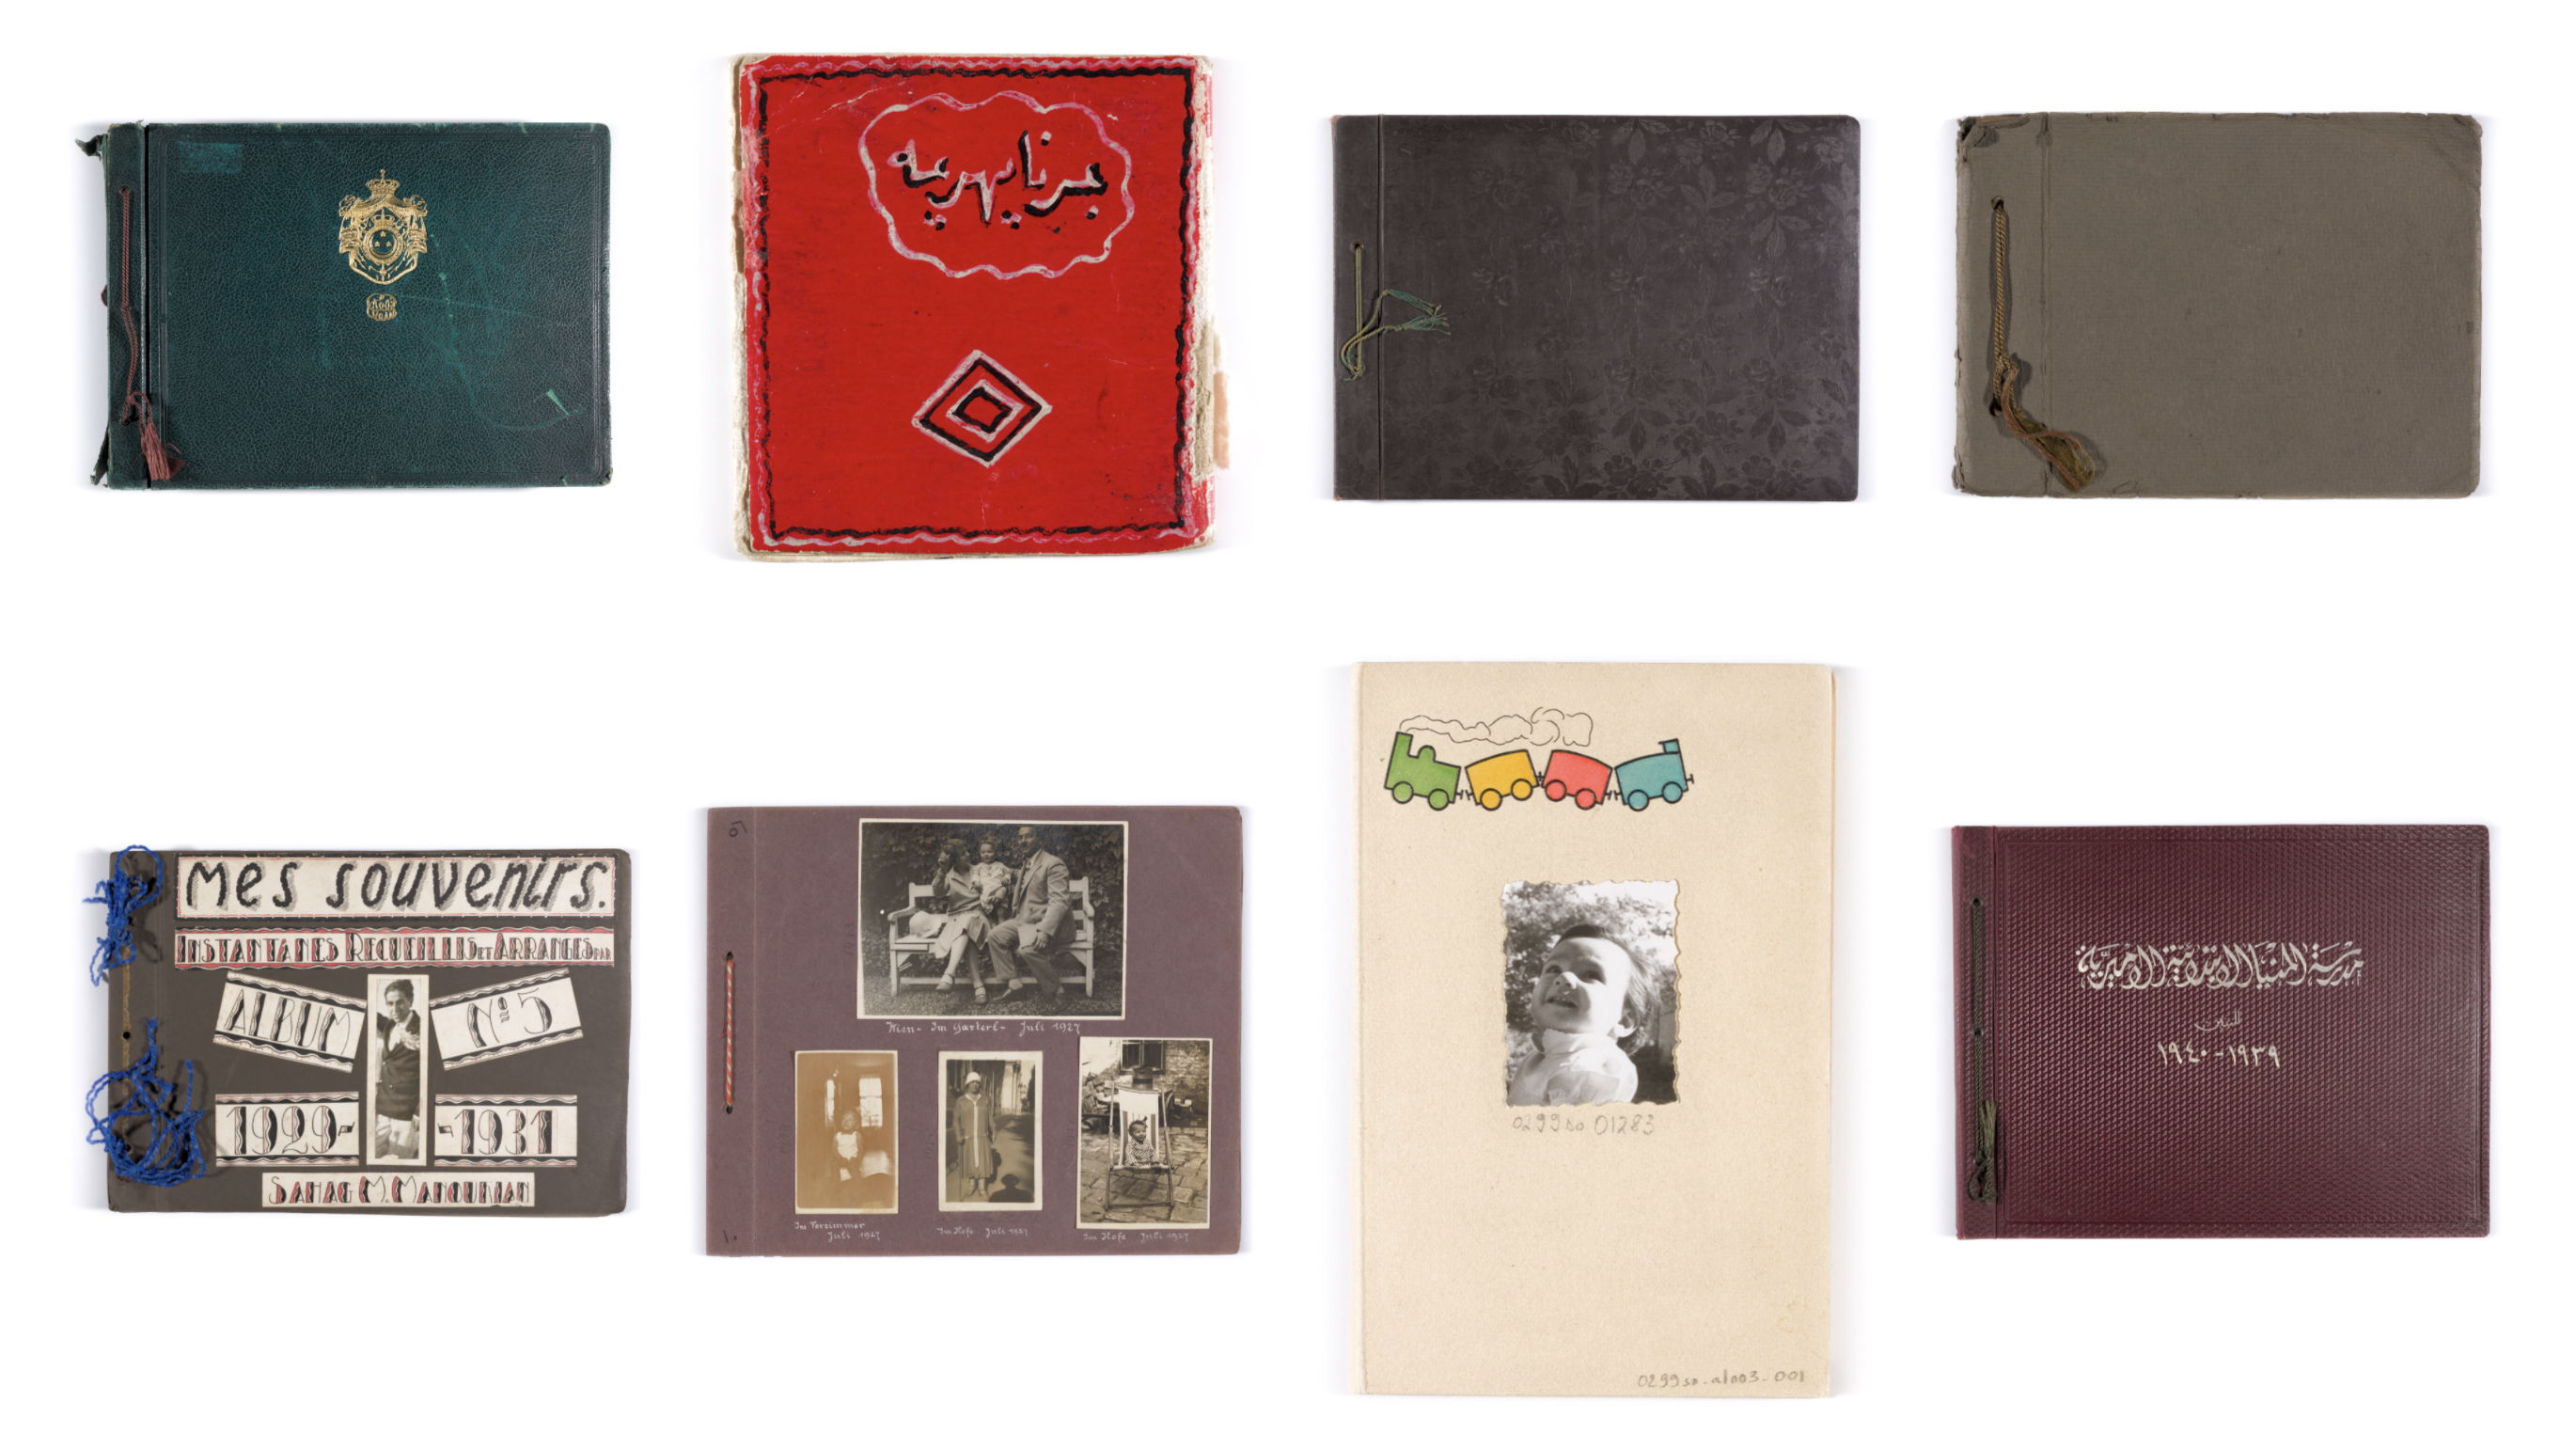 Screenshot showing the albums that have been digitised by the AIF as part of the William Talbott Hillman Foundation mission, and which will soon be accessible on the AIF’s digital platform.